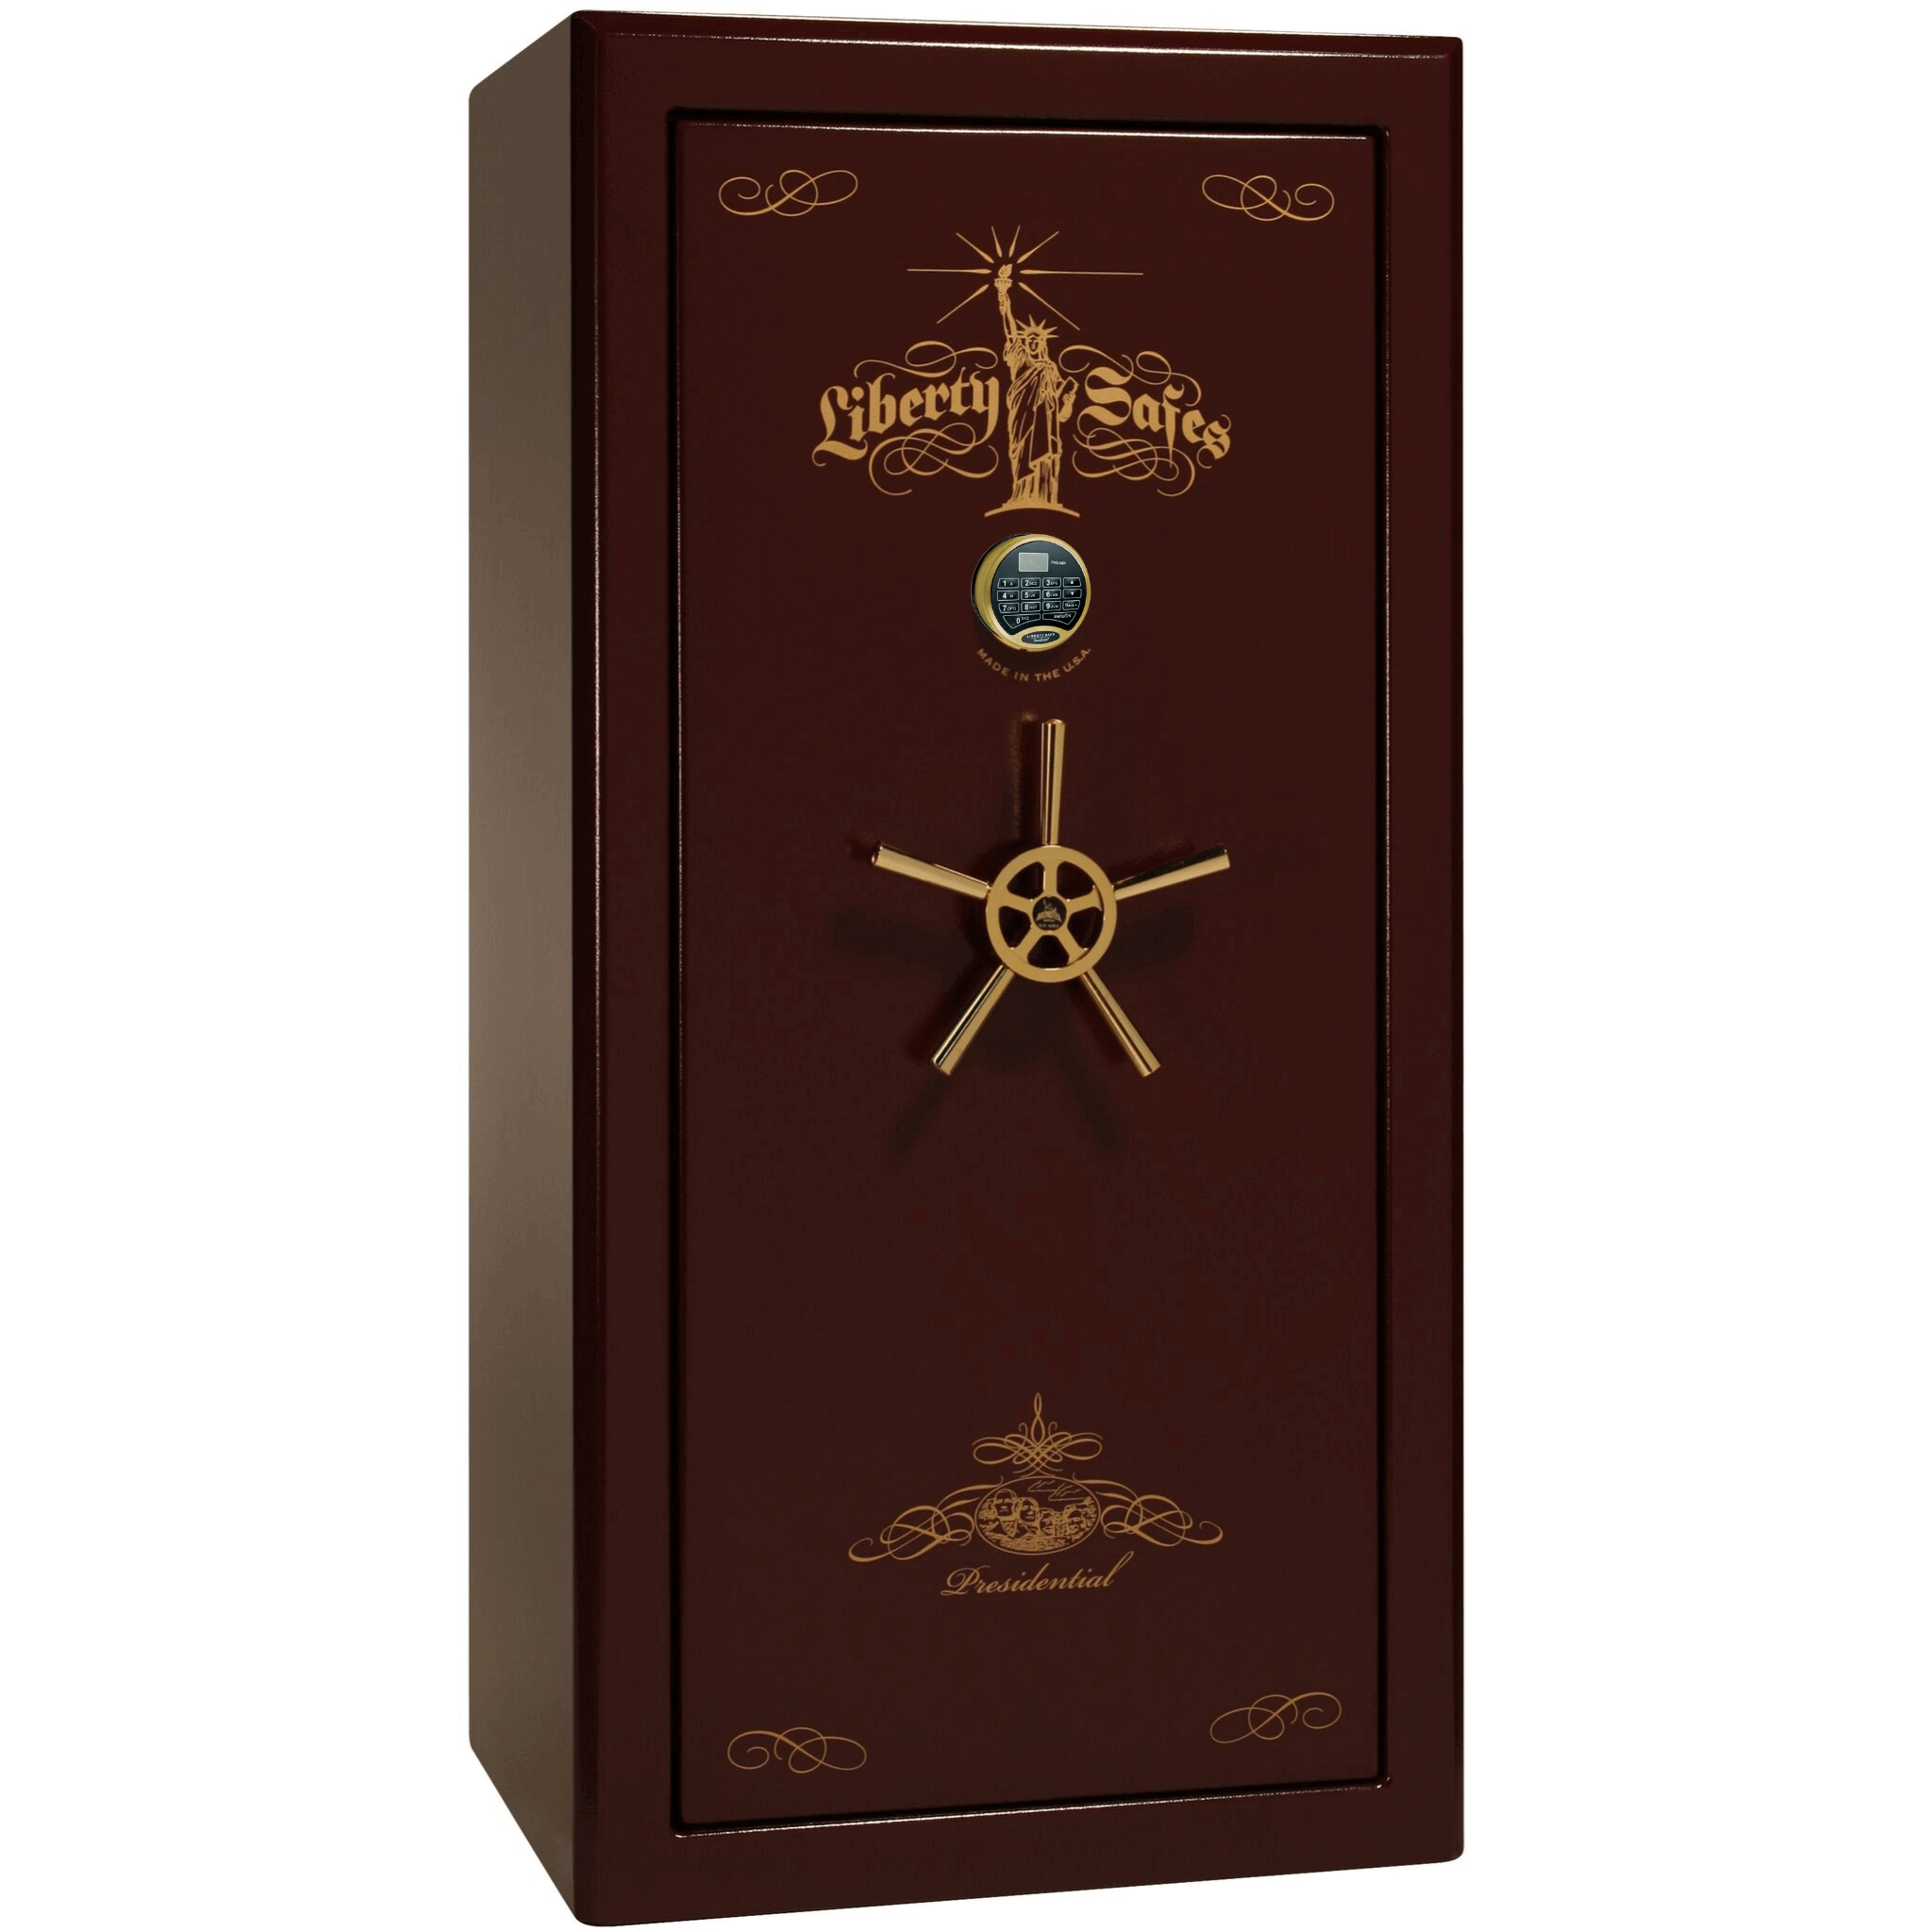 Presidential Series | Level 8 Security | 2.5 Hours Fire Protection | 25 | Dimensions: 60.5"(H) x 30.25"(W) x 28.5"(D) | Burgundy Marble Gold Hardware | Electronic Lock